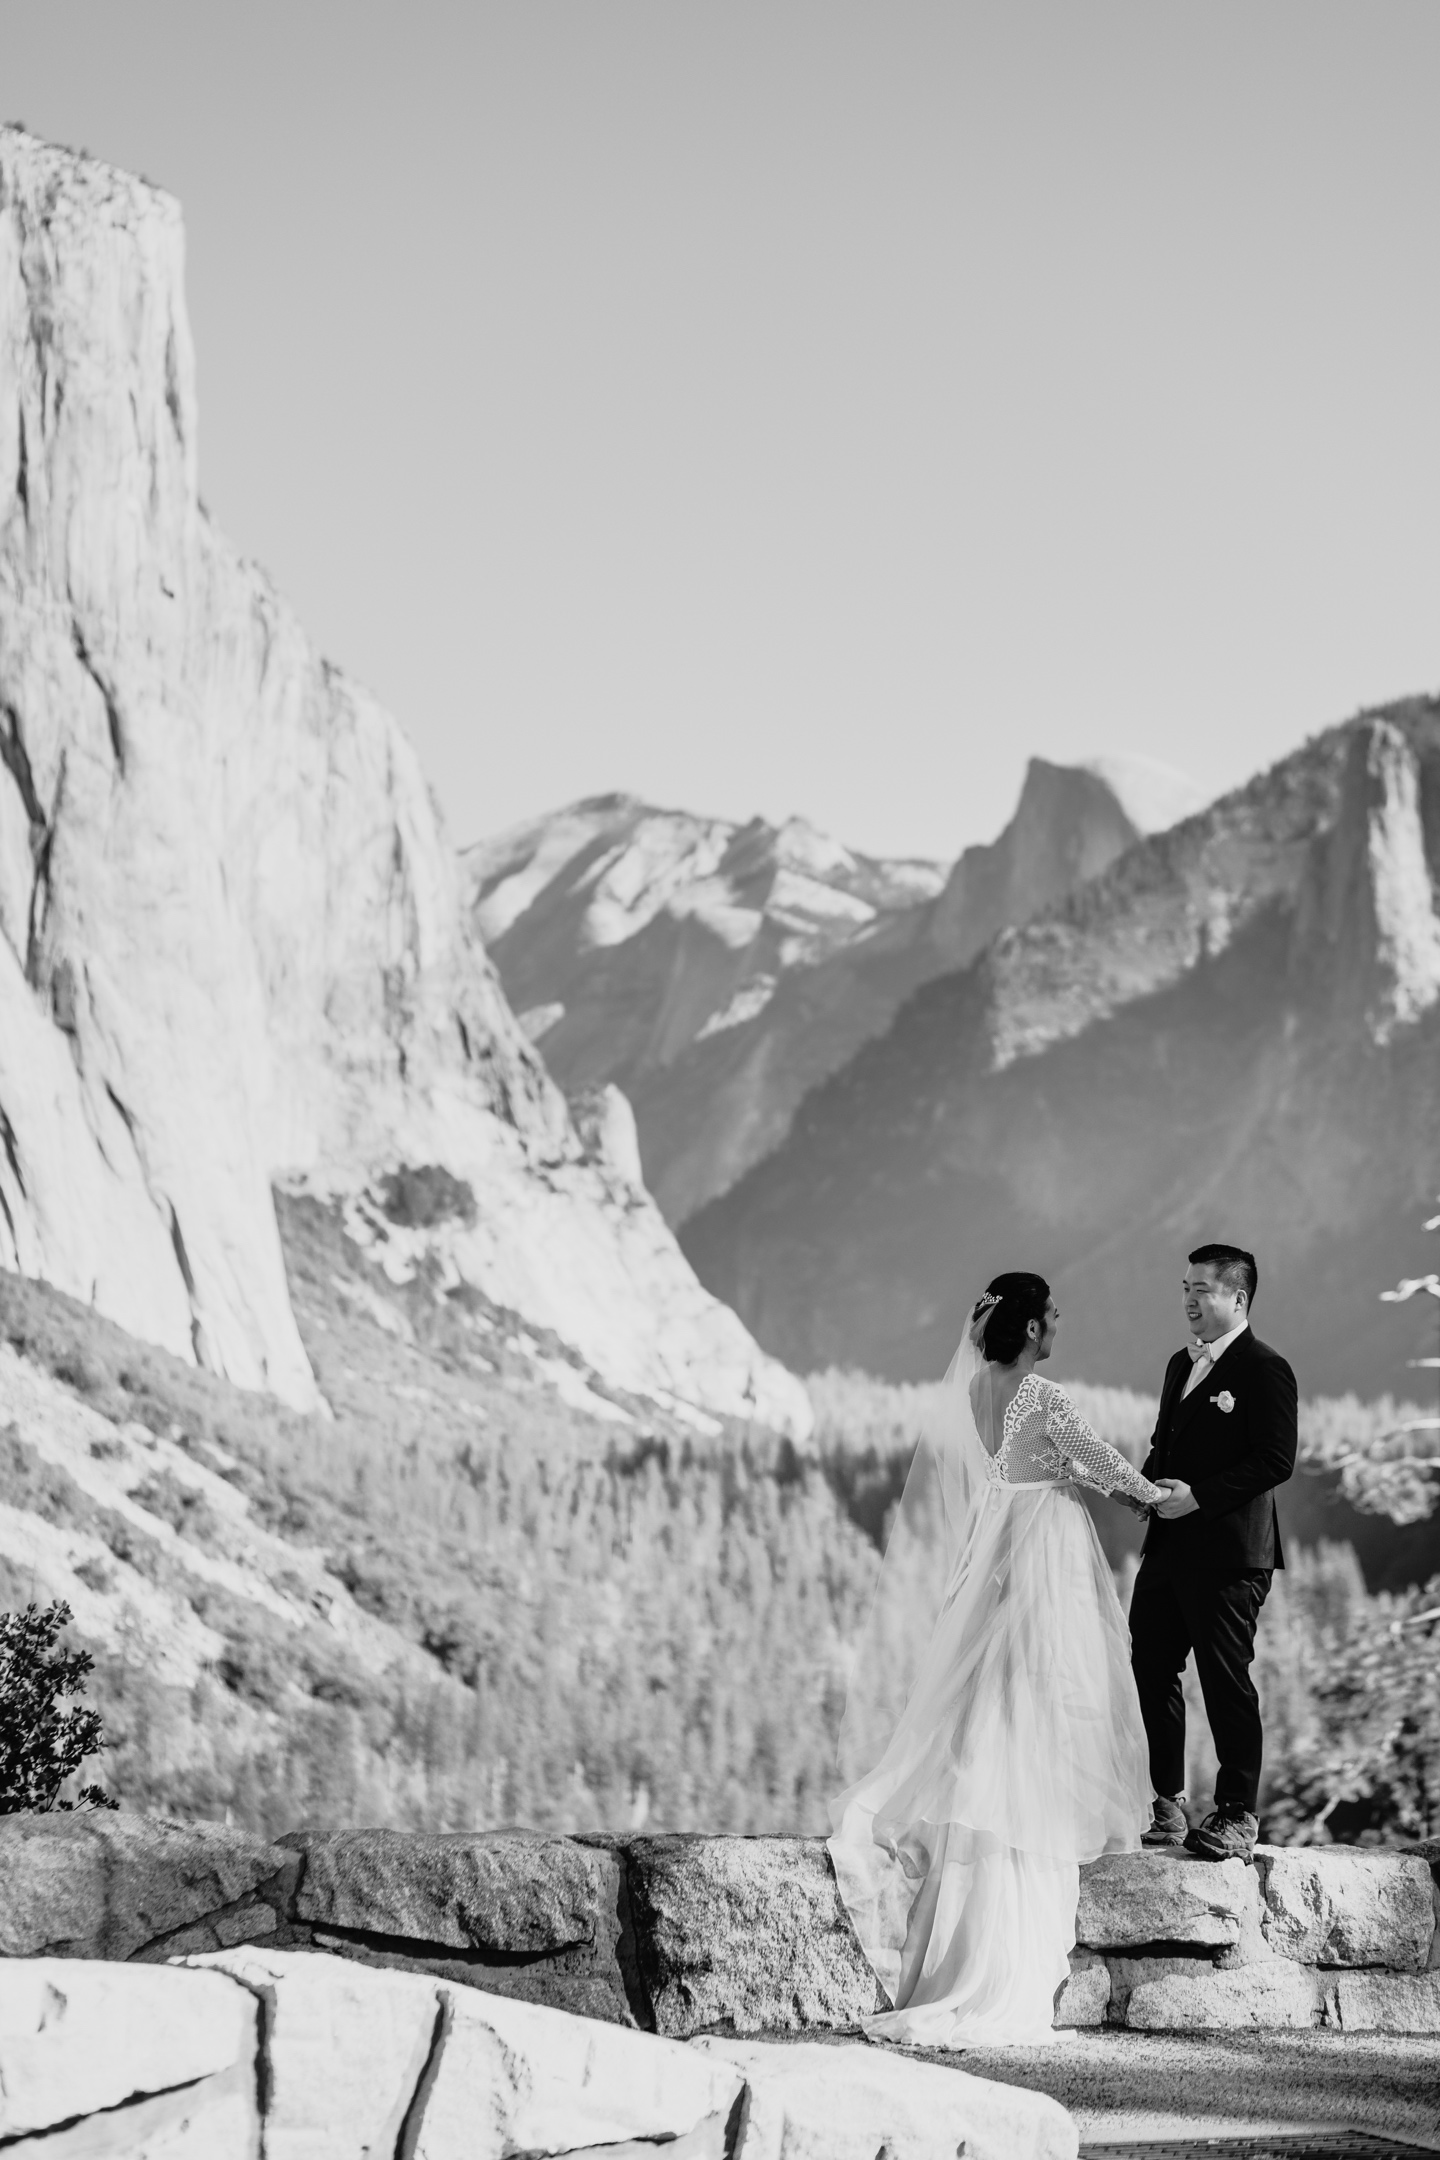 Bride and groom hold hands and gaze at each other with the Yosemite landscape as their backdrop.